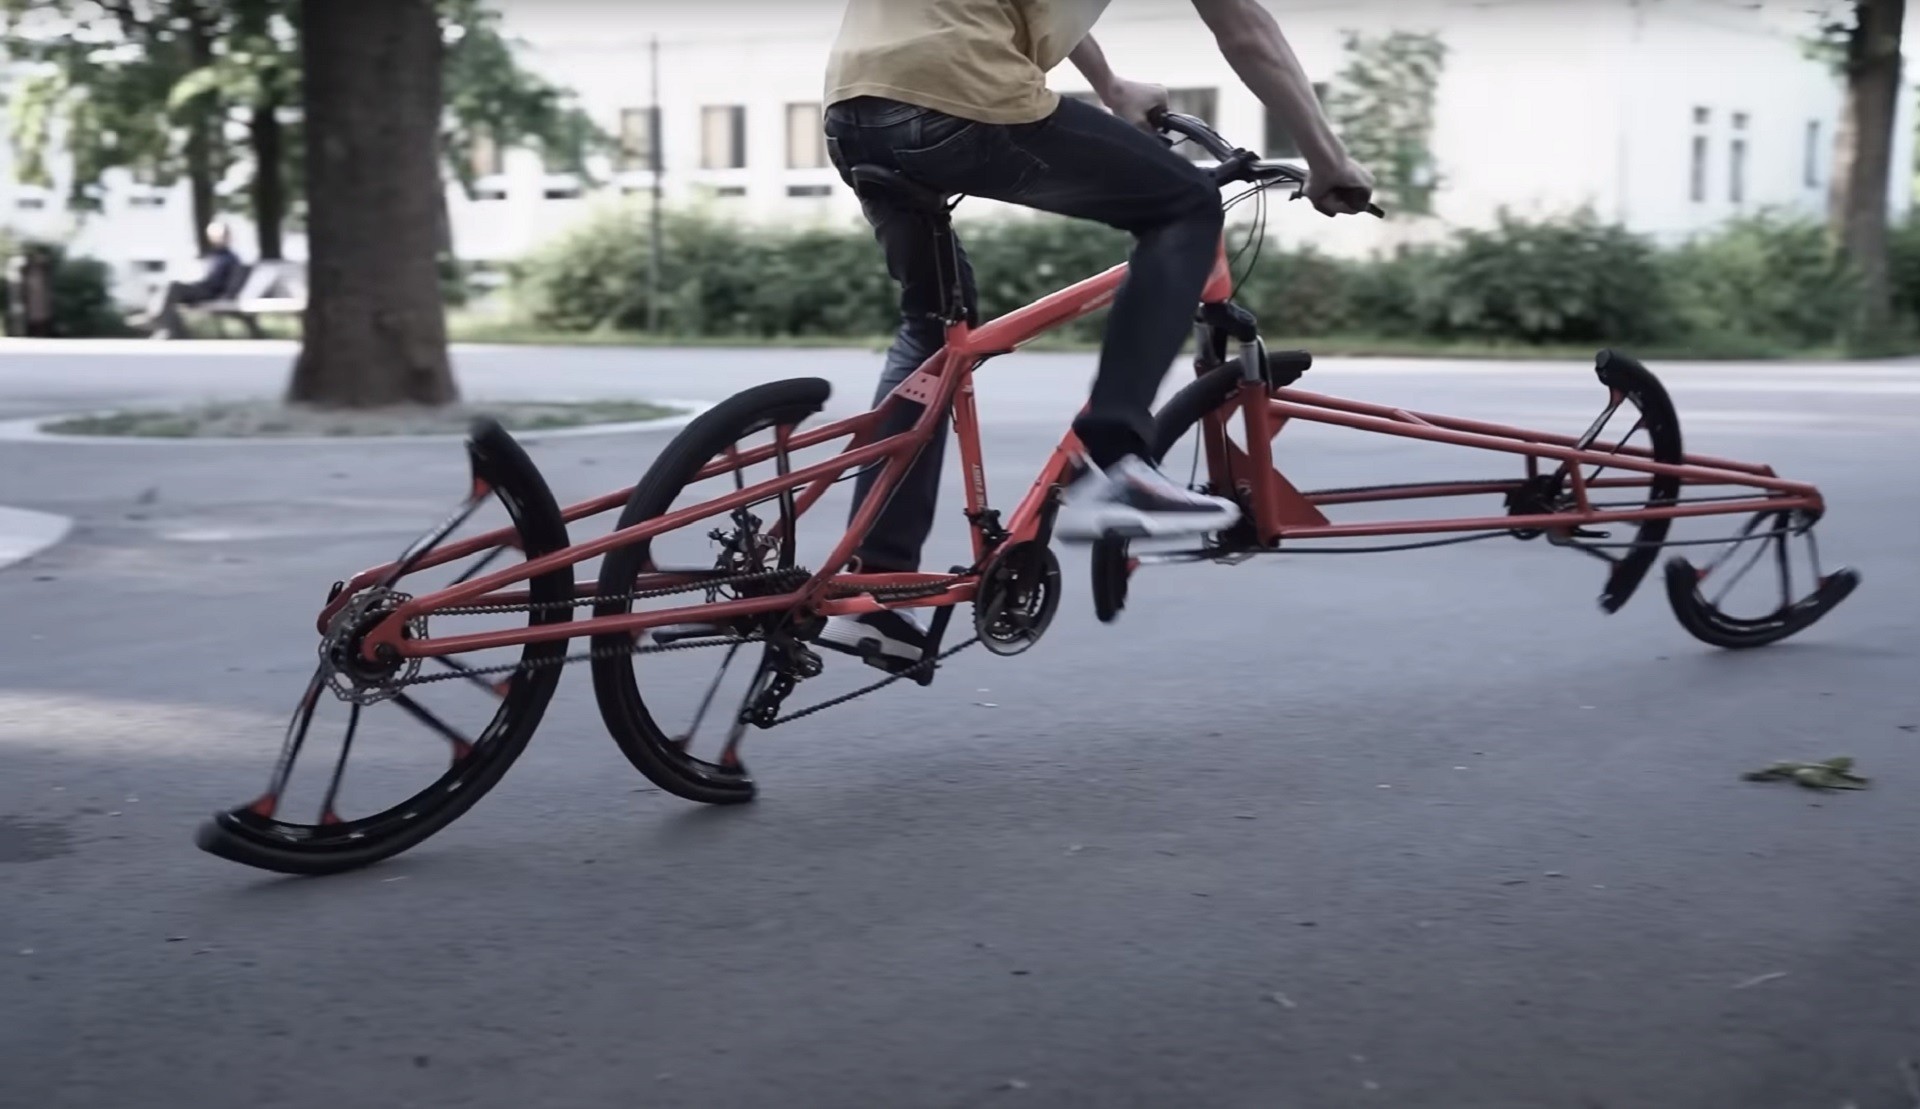 this split wheel vehicle is probably the most overcomplicated pedal cycle design out there 2